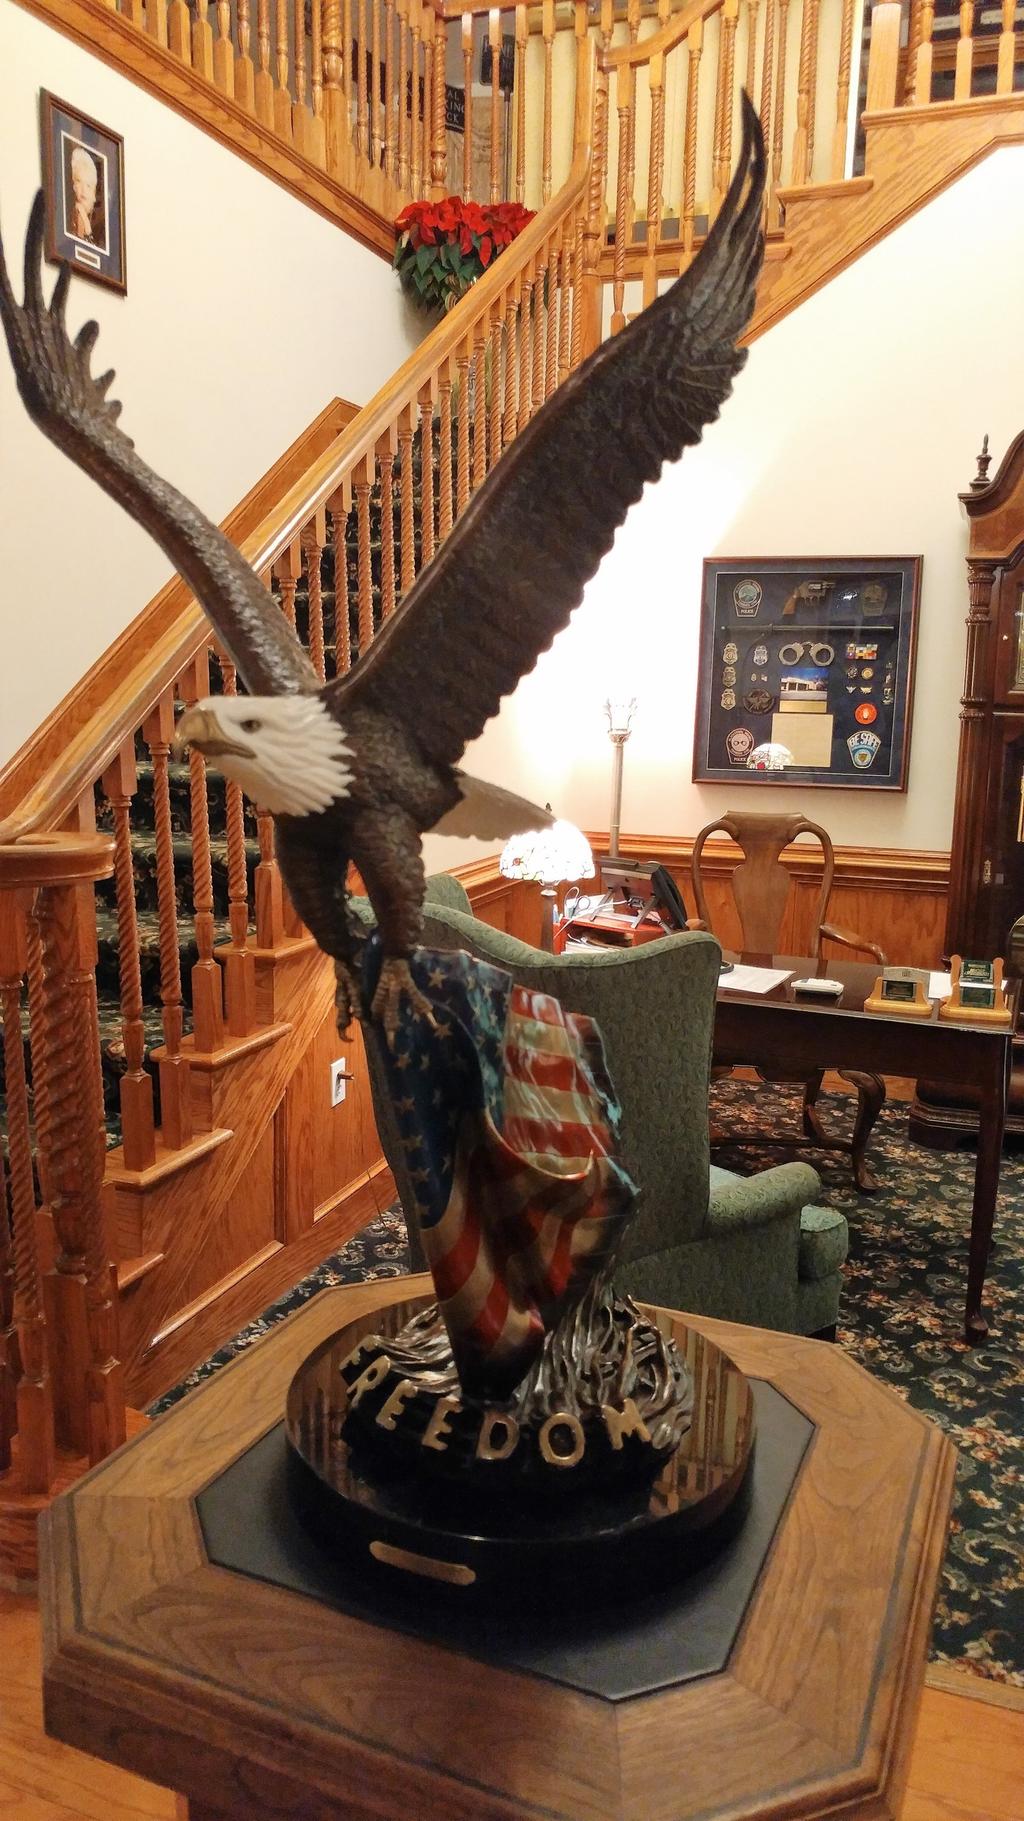 Pictured: Freedom Bust at McCoy Funeral Home in Blacksburg which contains ashes from 9